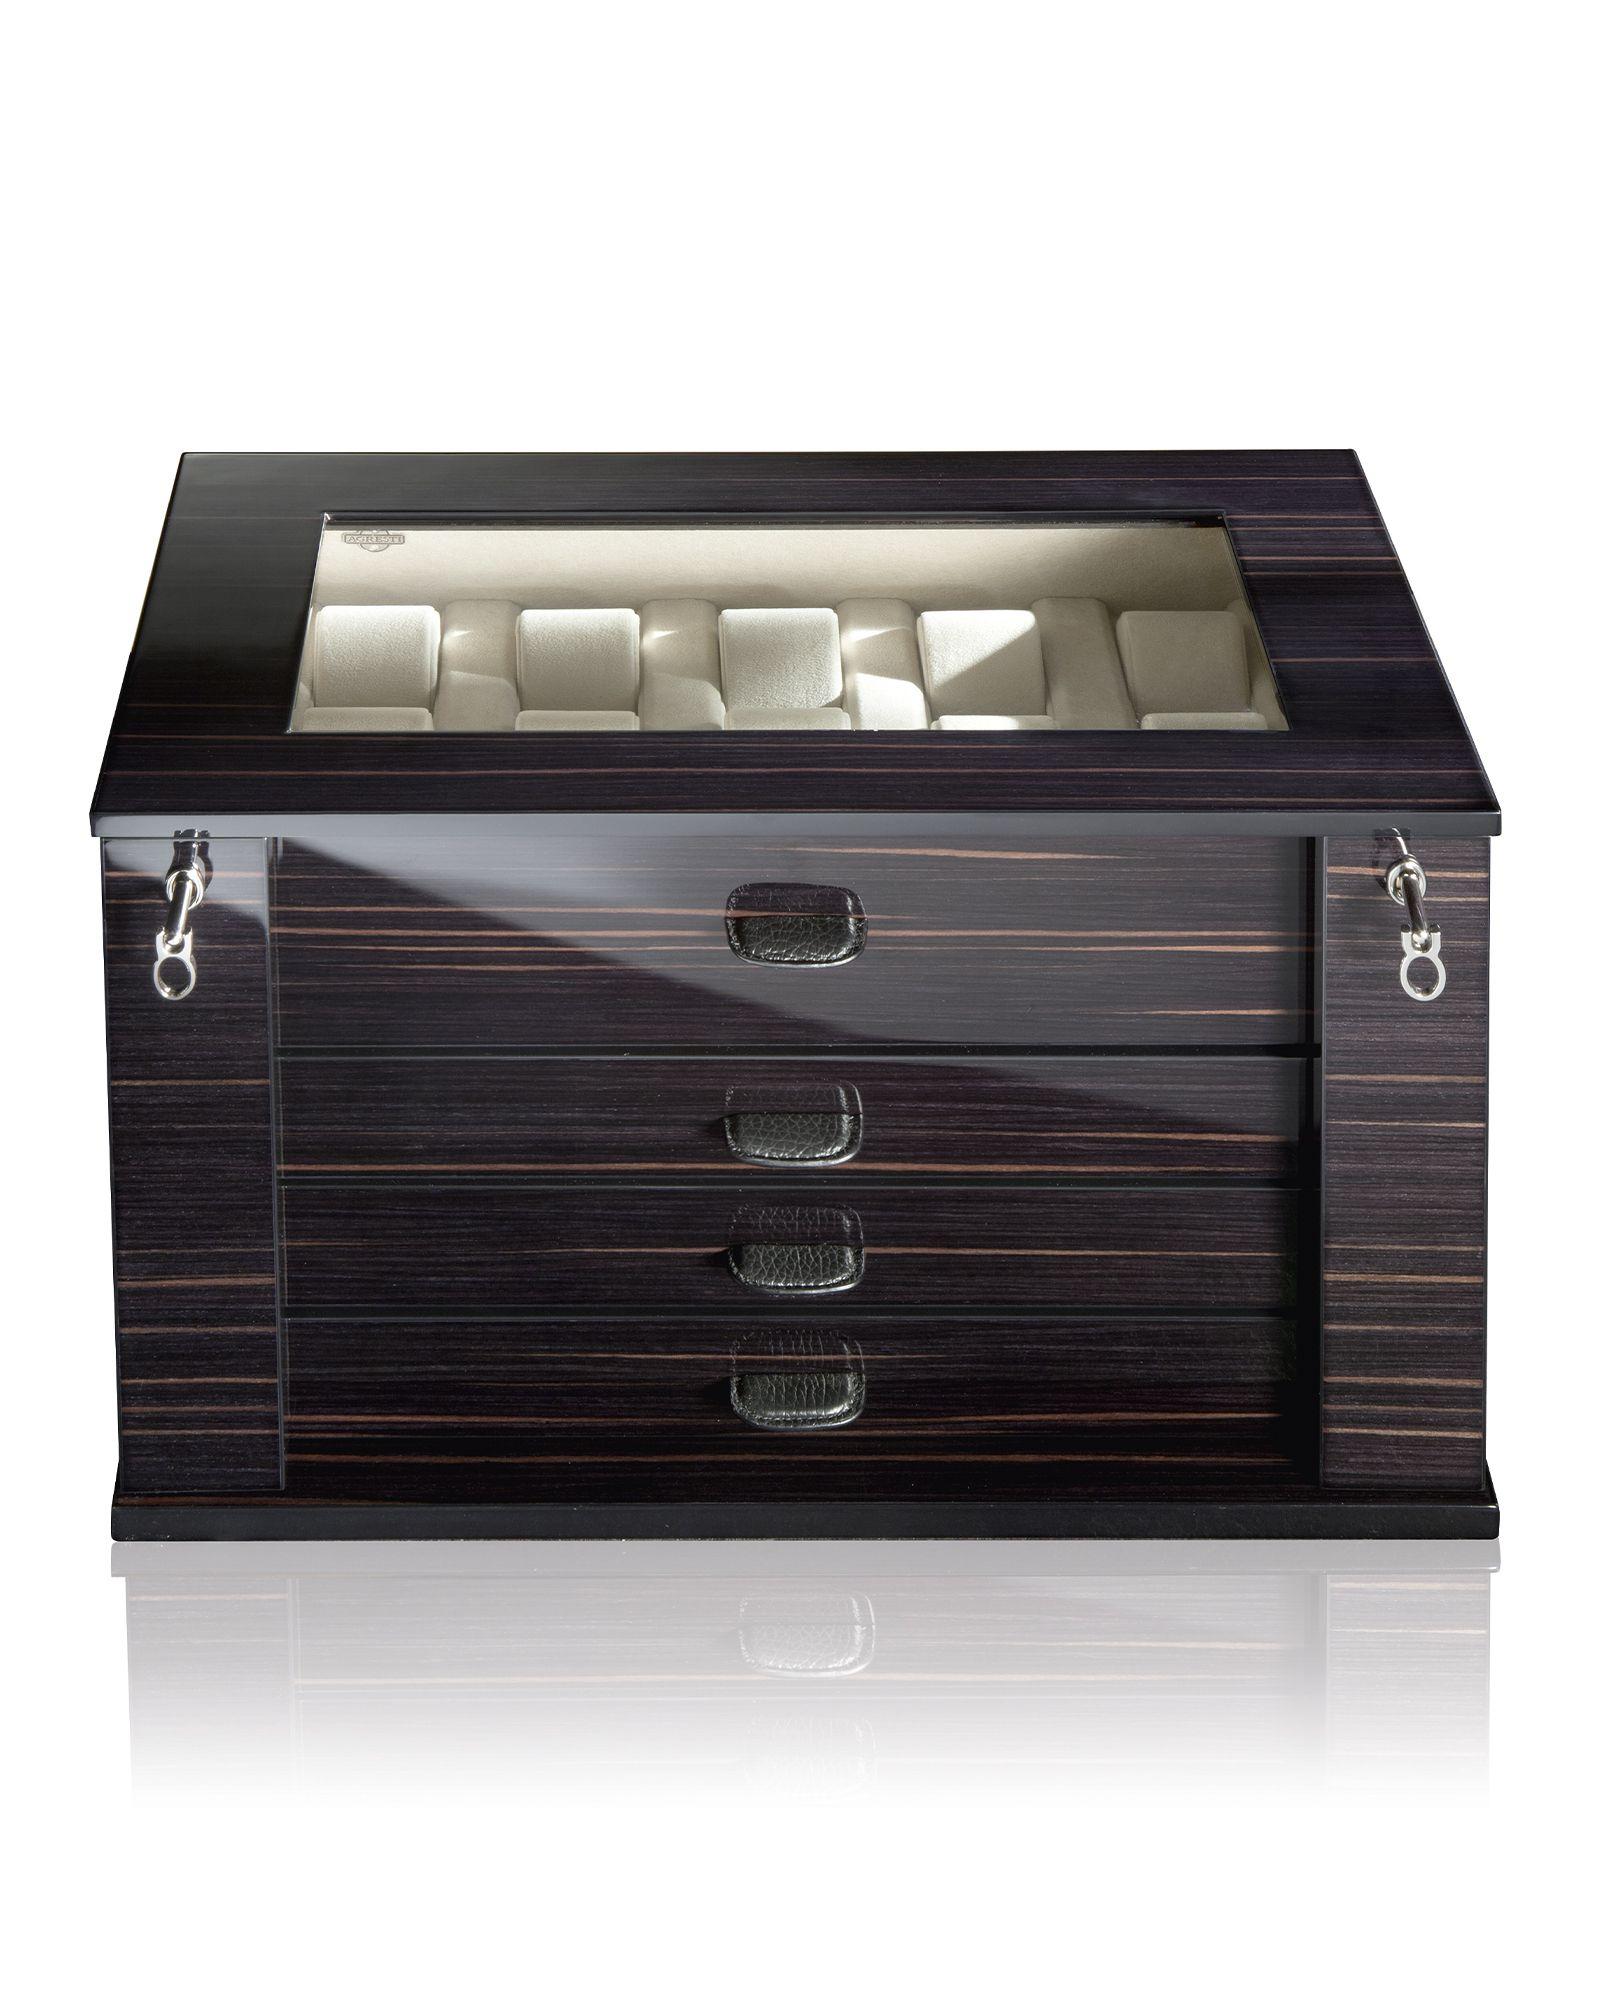 Serious watch collectors only need apply for this last offering from Agresti Firenze. A stunning wooden watch chest, in polished ebony, Il Mio Tempo Ebano offers lockable storage for up to twenty-eight watches. The top drawer, complete with glass